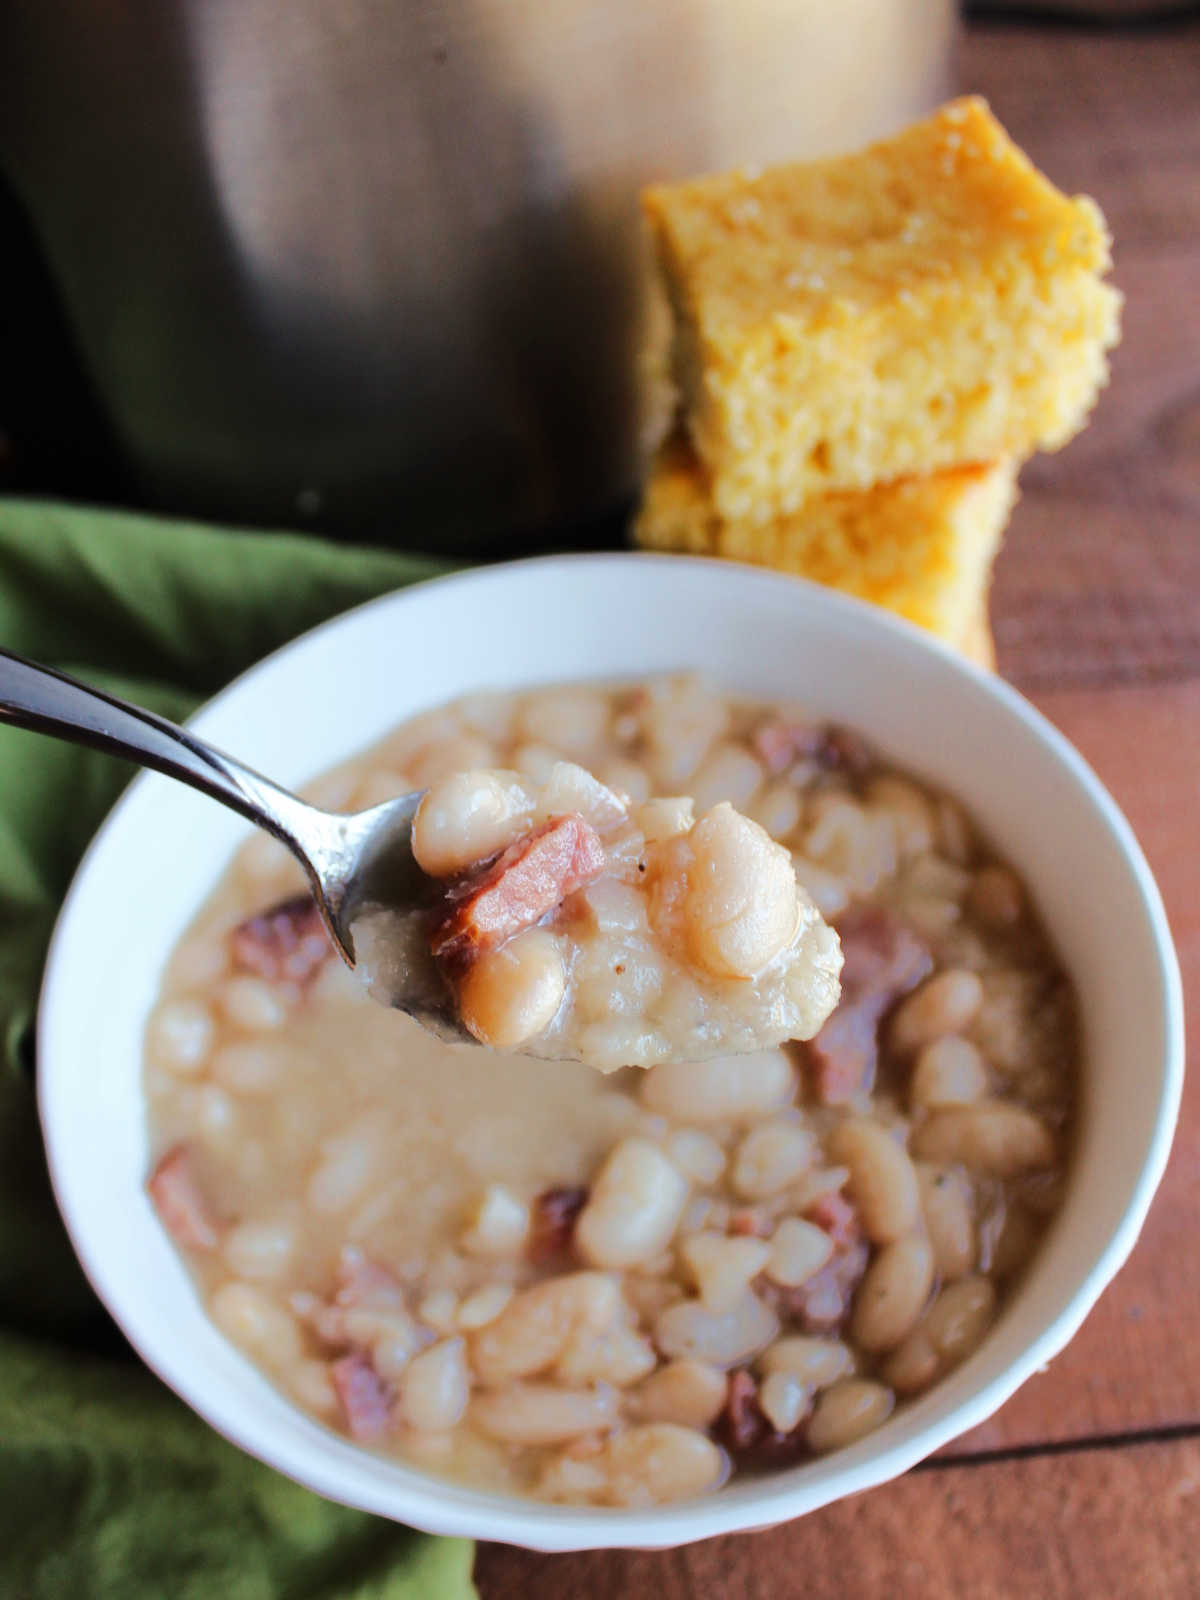 Spoonful of ham and beans with cornbread and crockpot in the background.